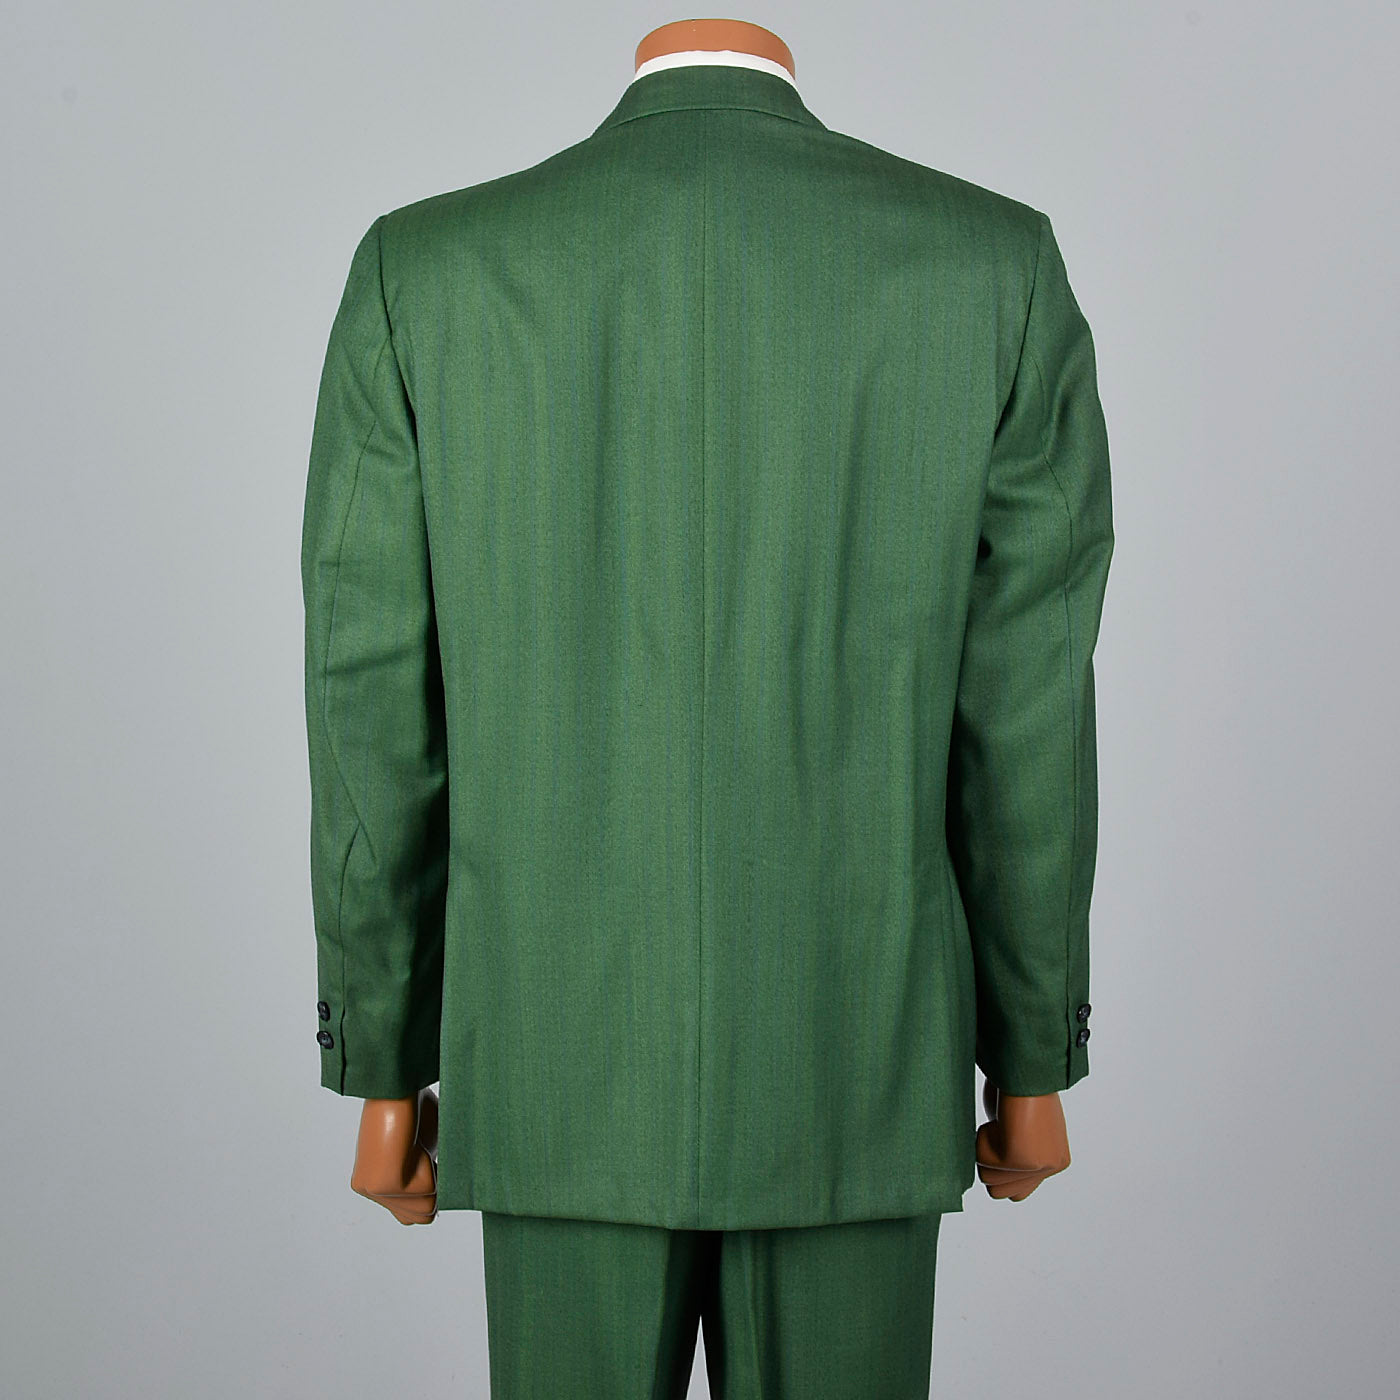 1960s Men's Bright Green Two Piece Suit